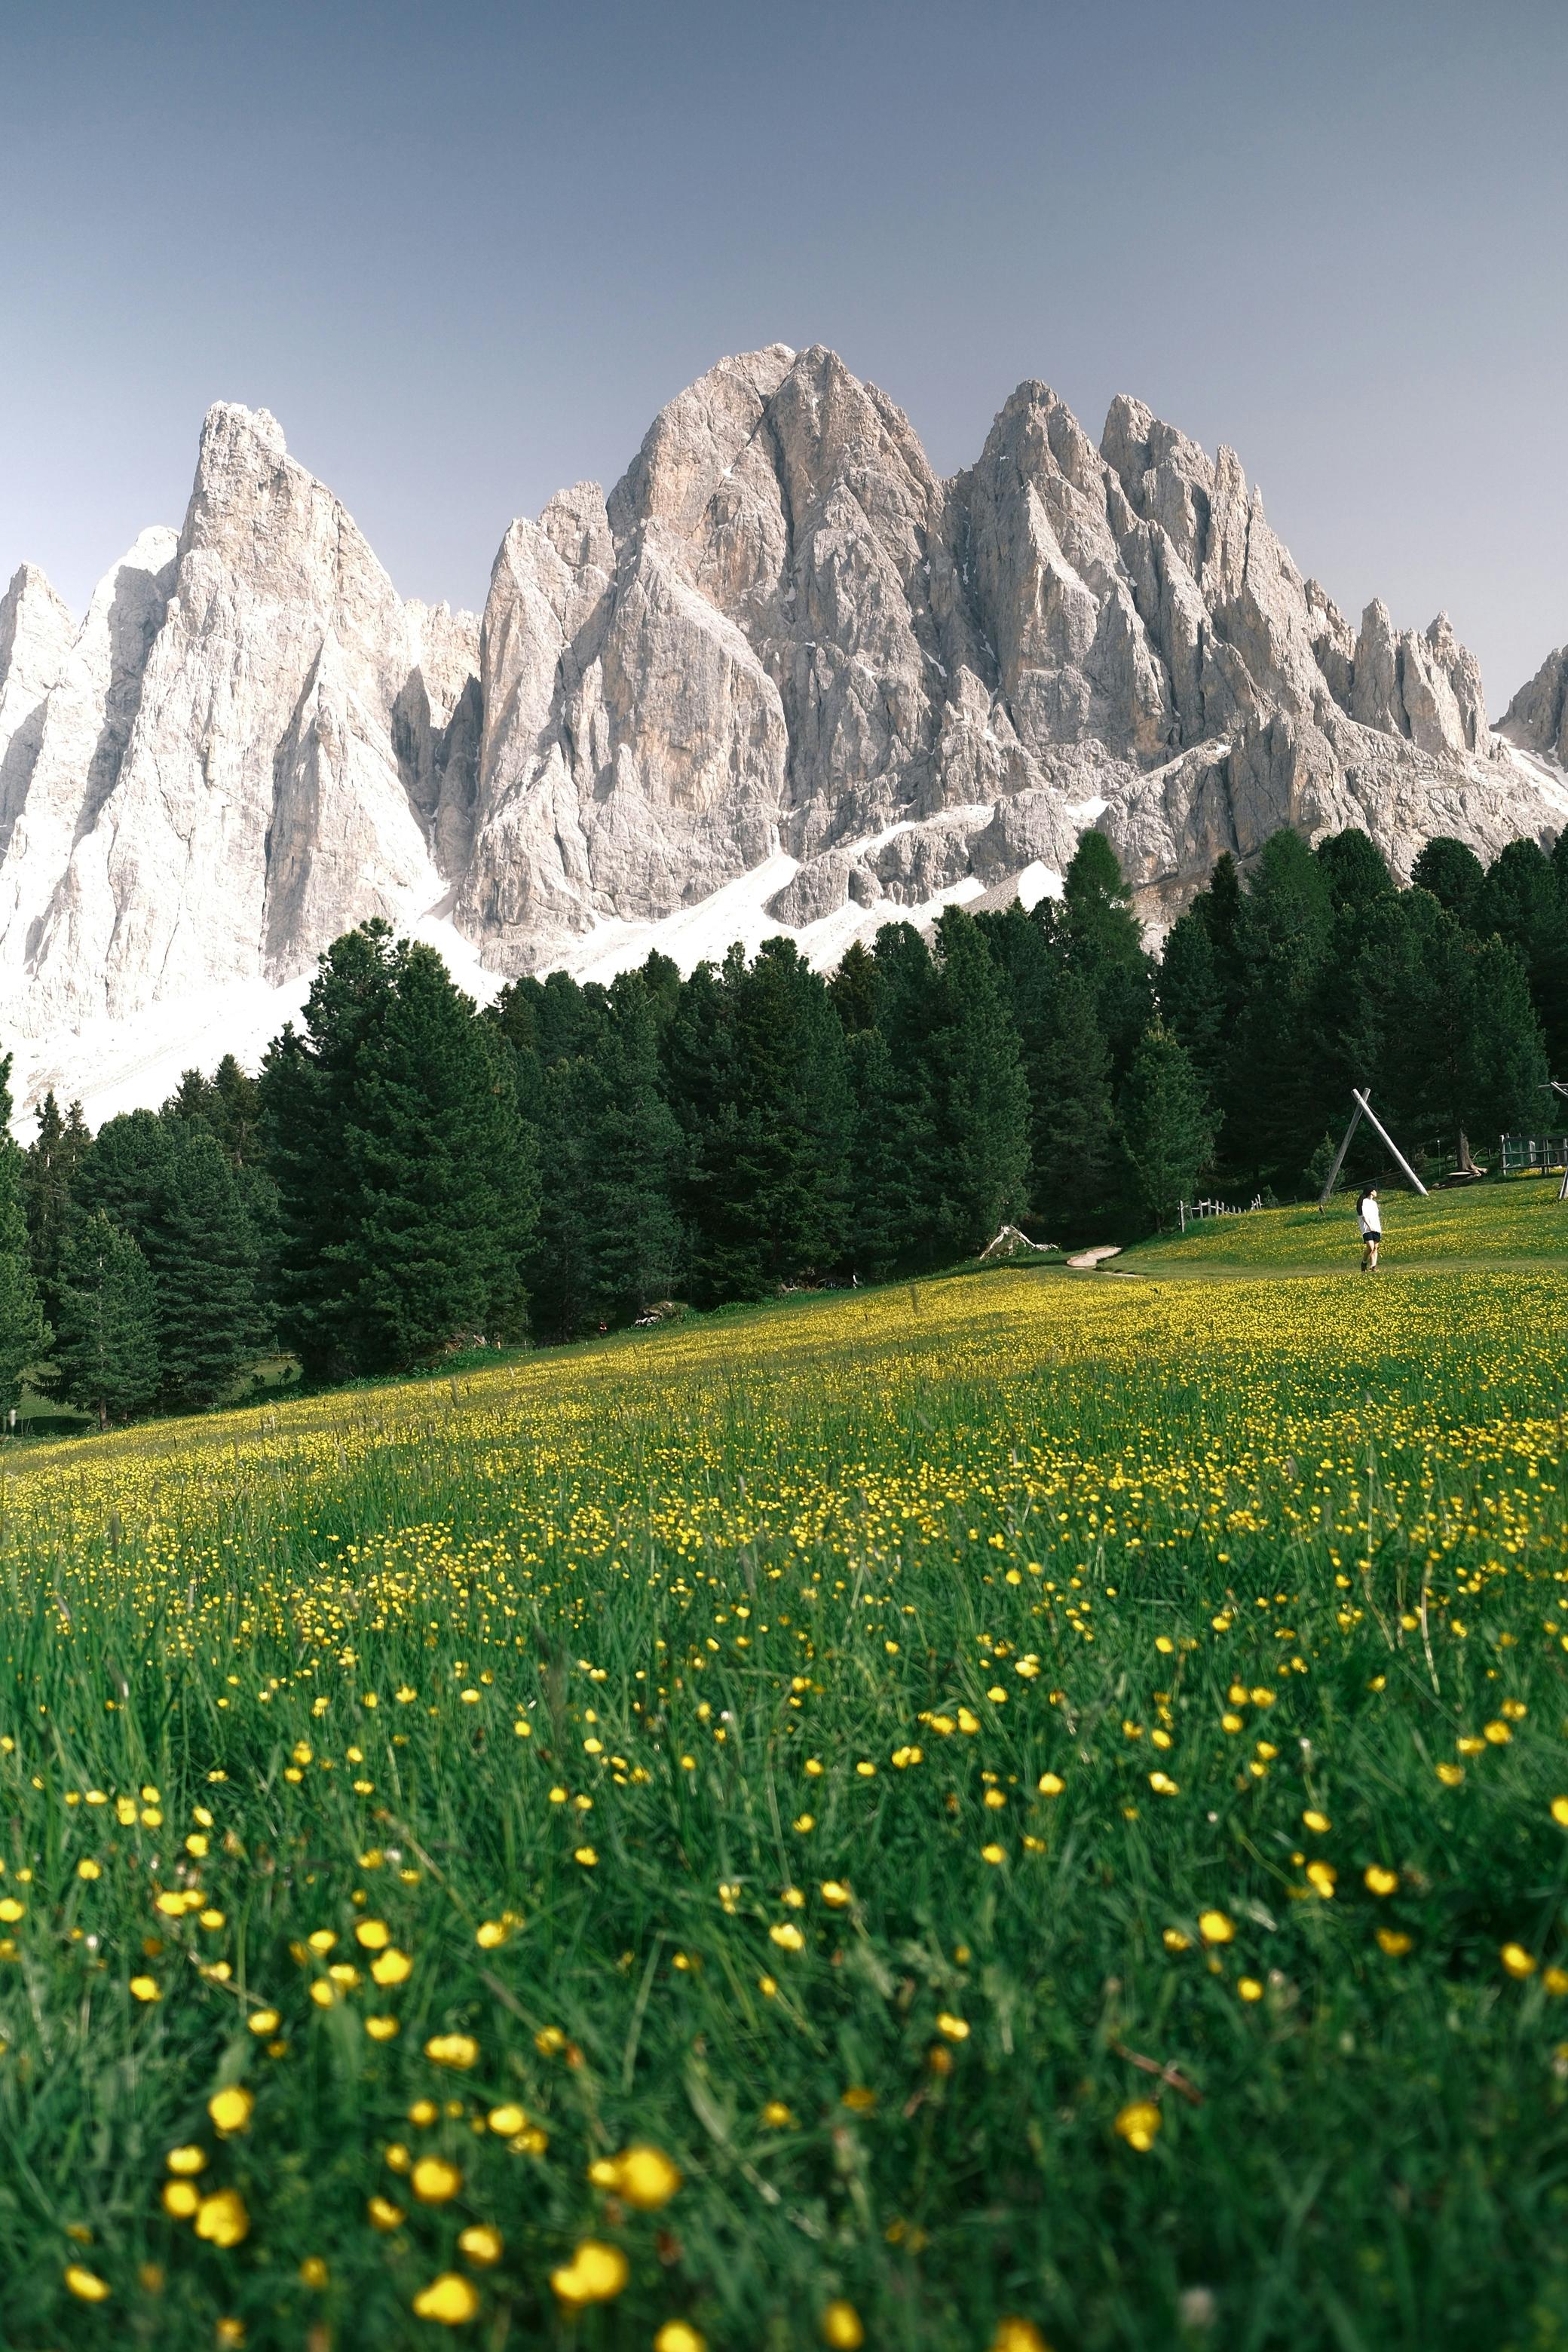 Alp mountains behind a grassy field with yellow wild flowers